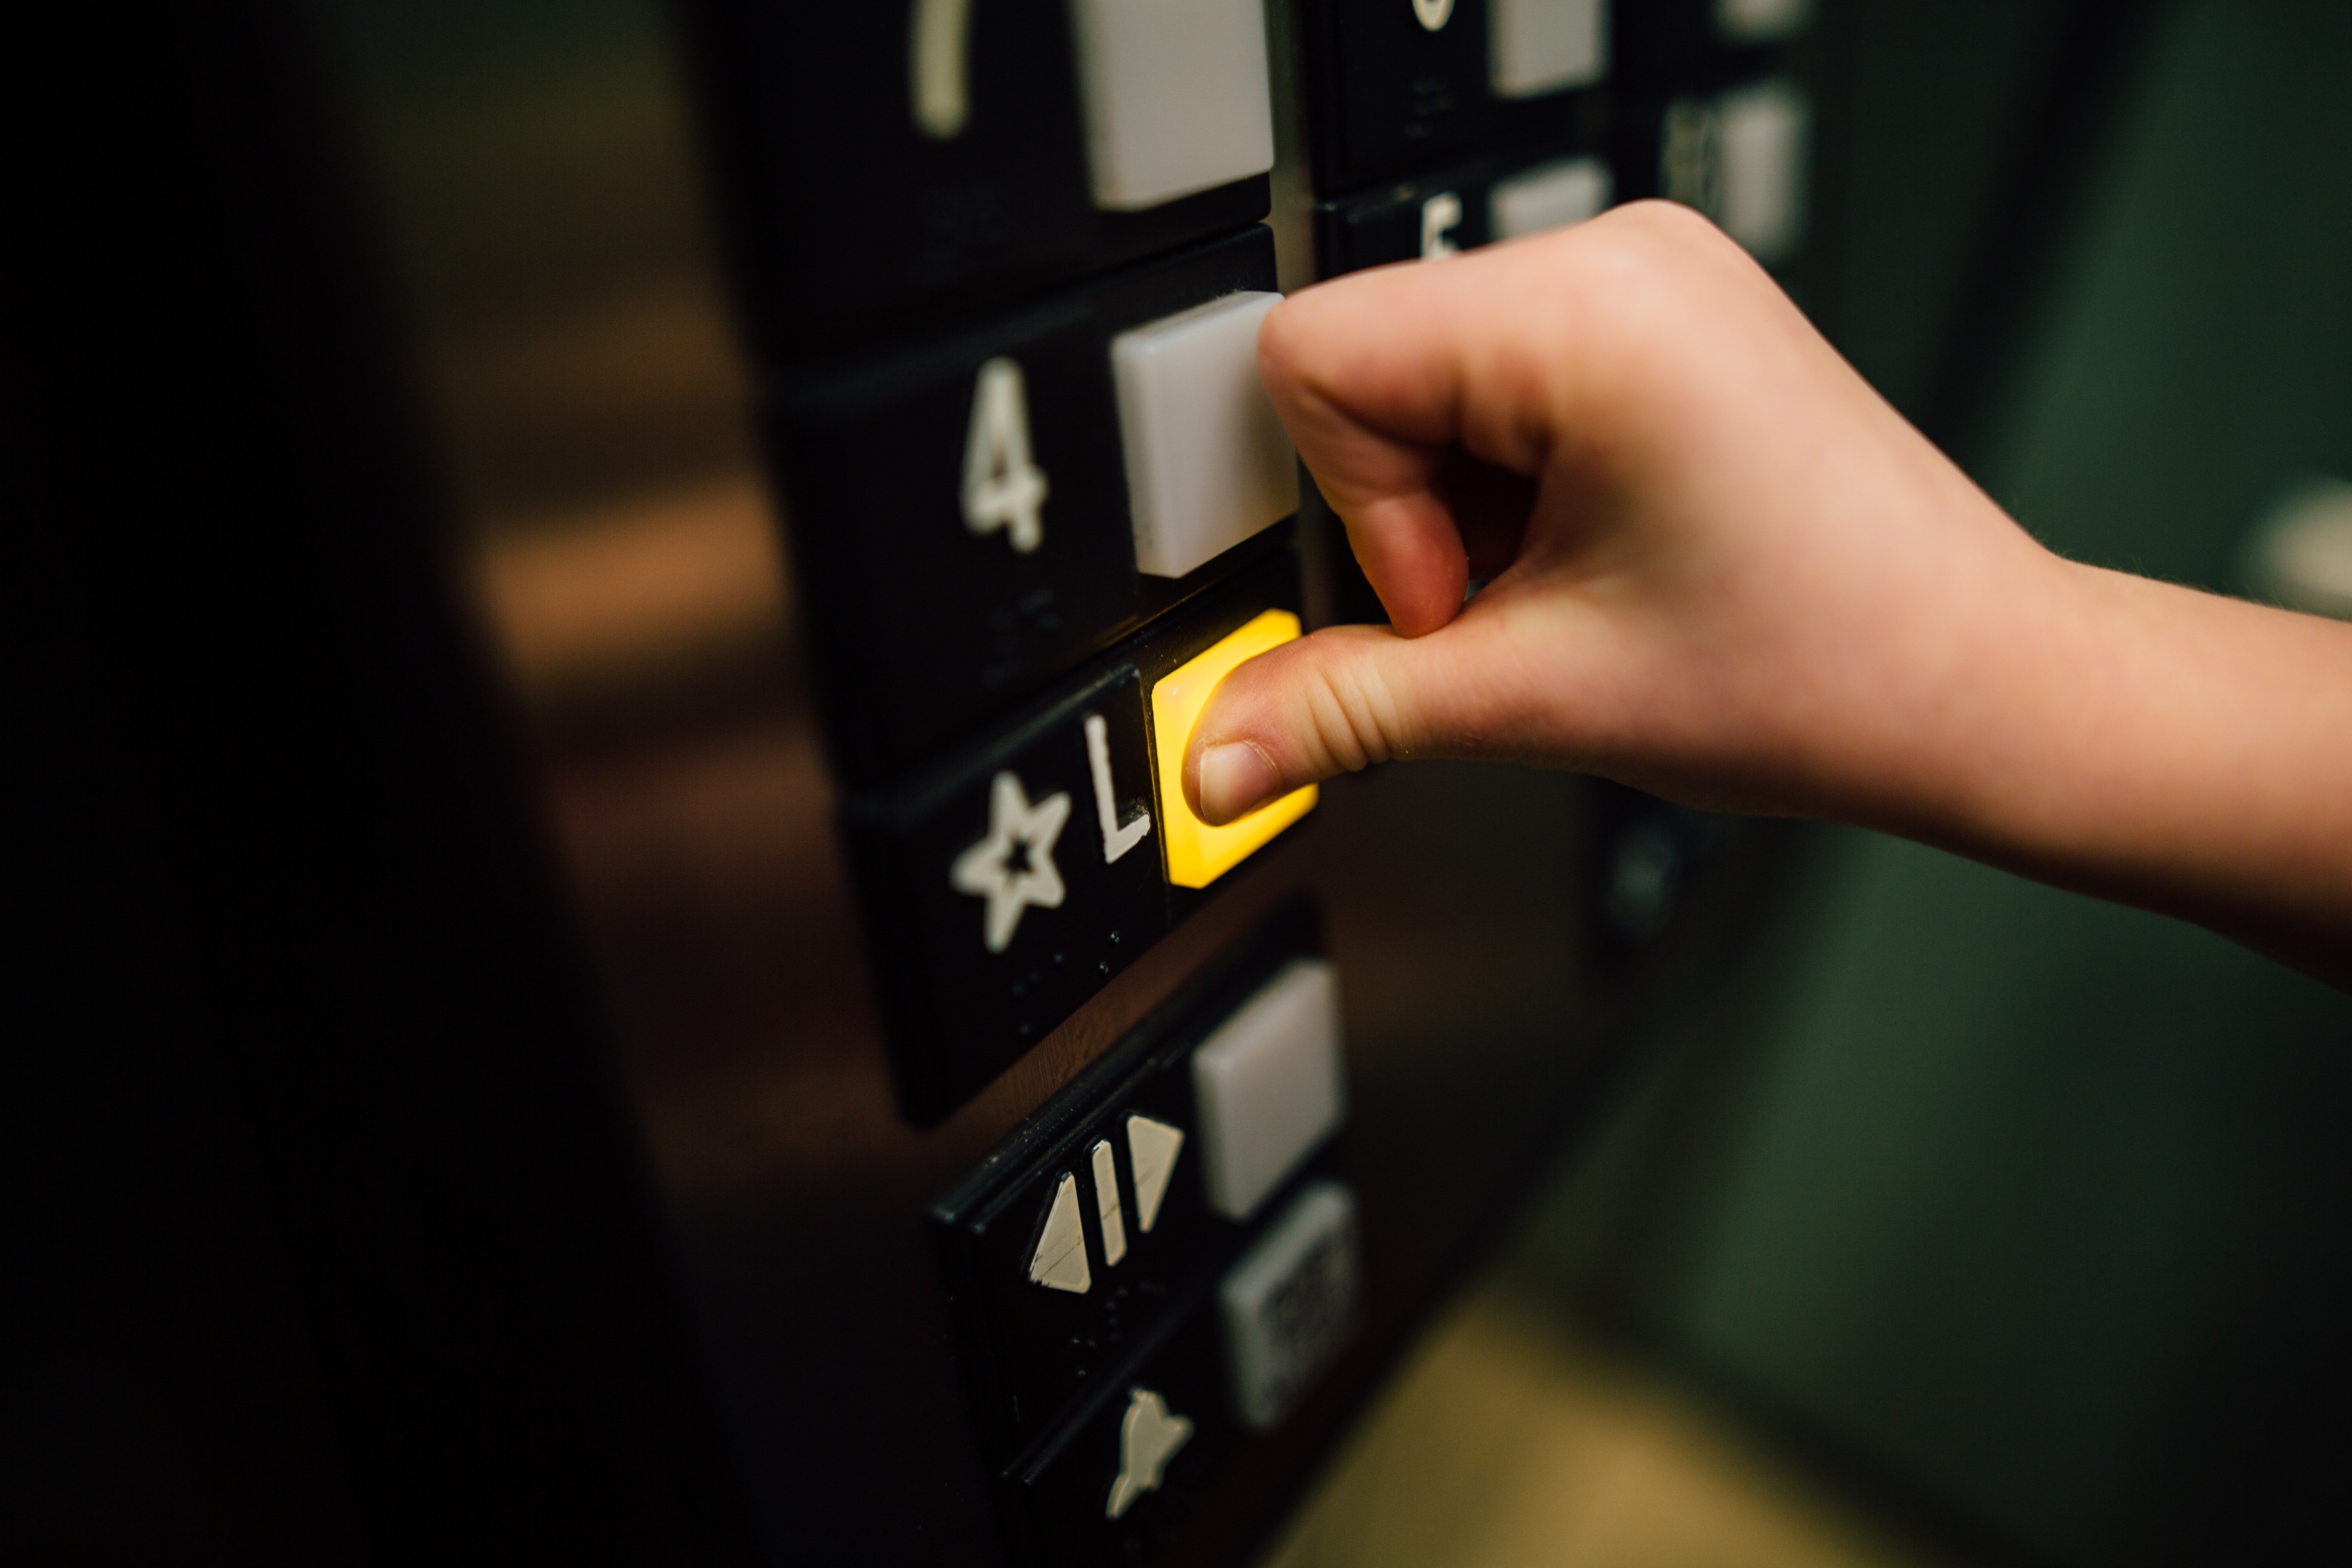 A hand pressing buttons inside an elevator | Source: Pexels